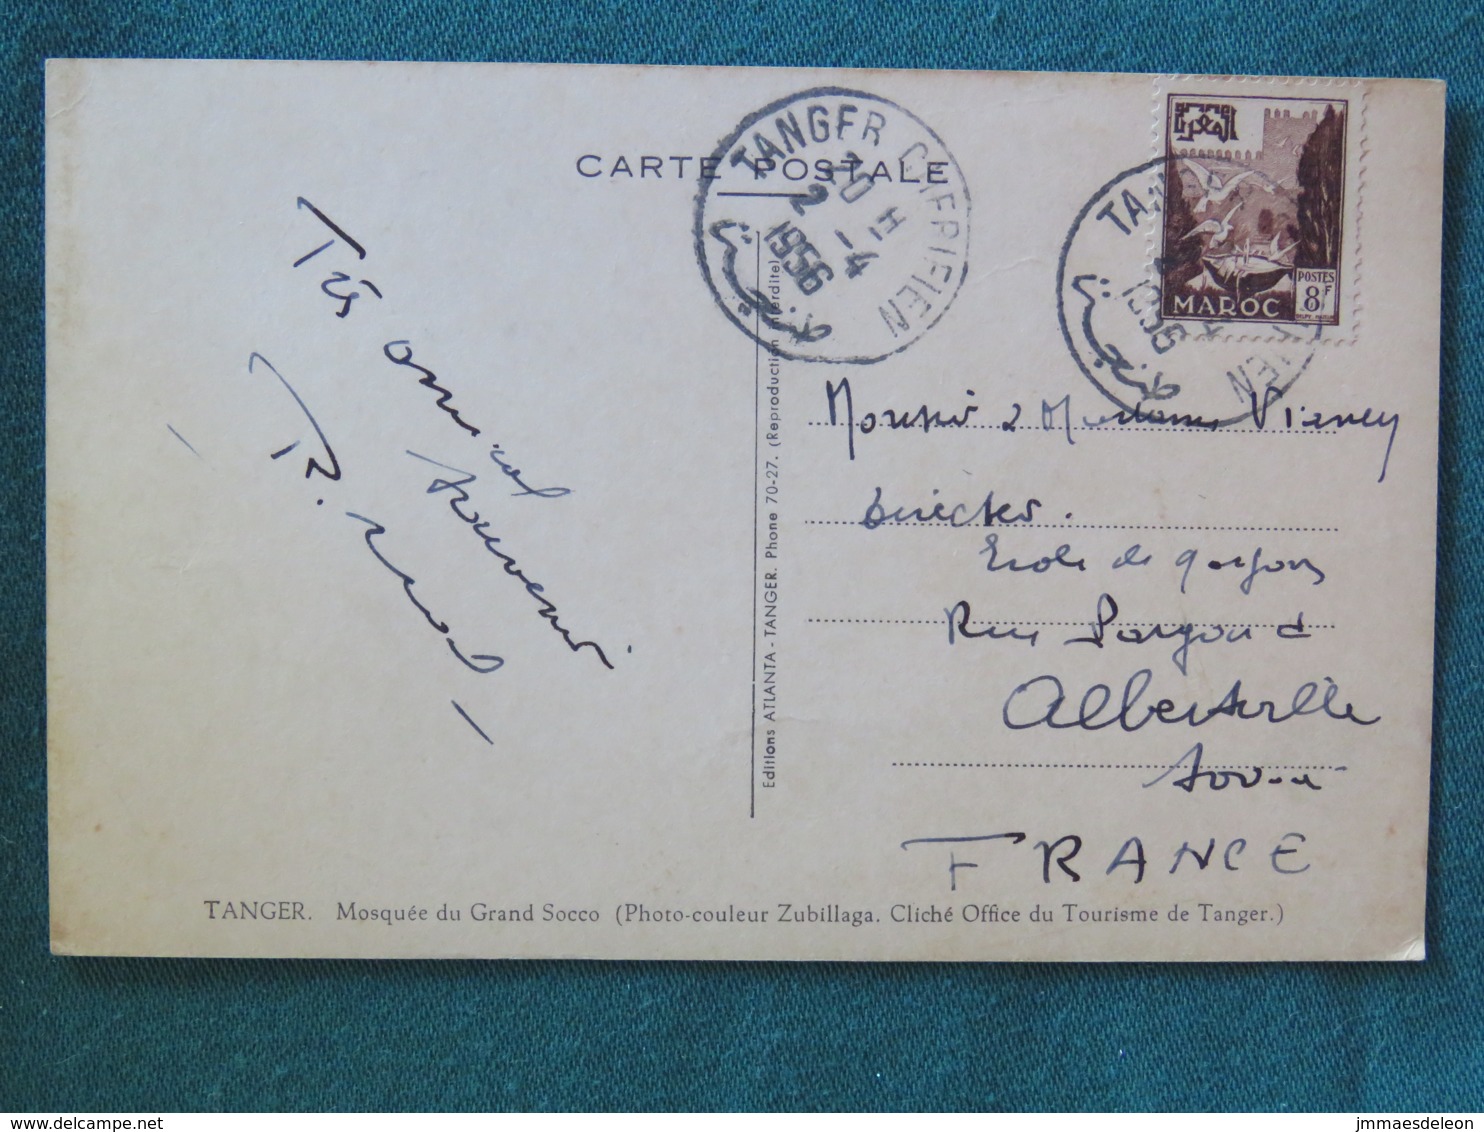 Morocco 1956 Postcard "Tanger Mosque" To France - Tanger